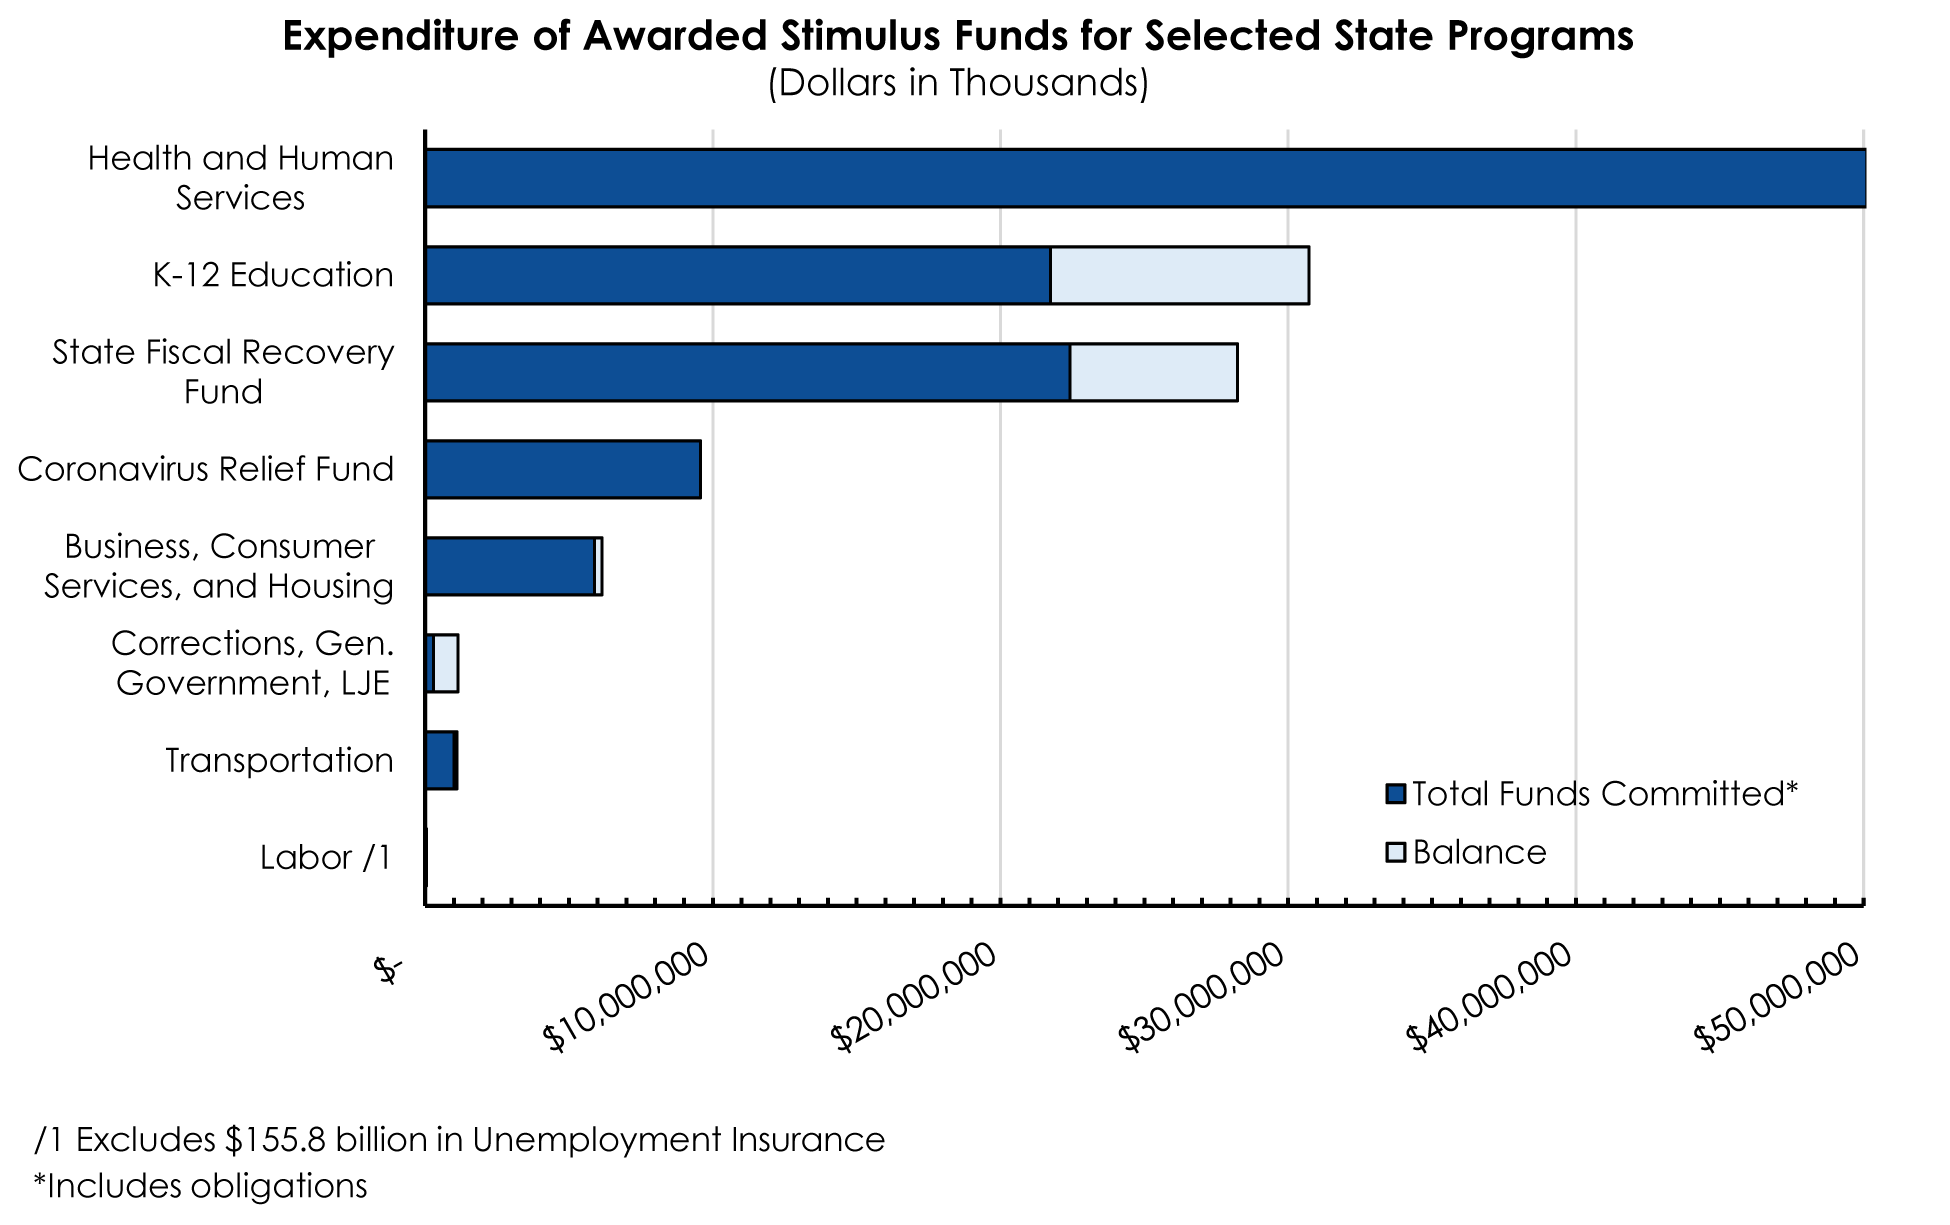 Bar Chart of Expenditure of Awarded Stimulus Funds for Selected State Programs